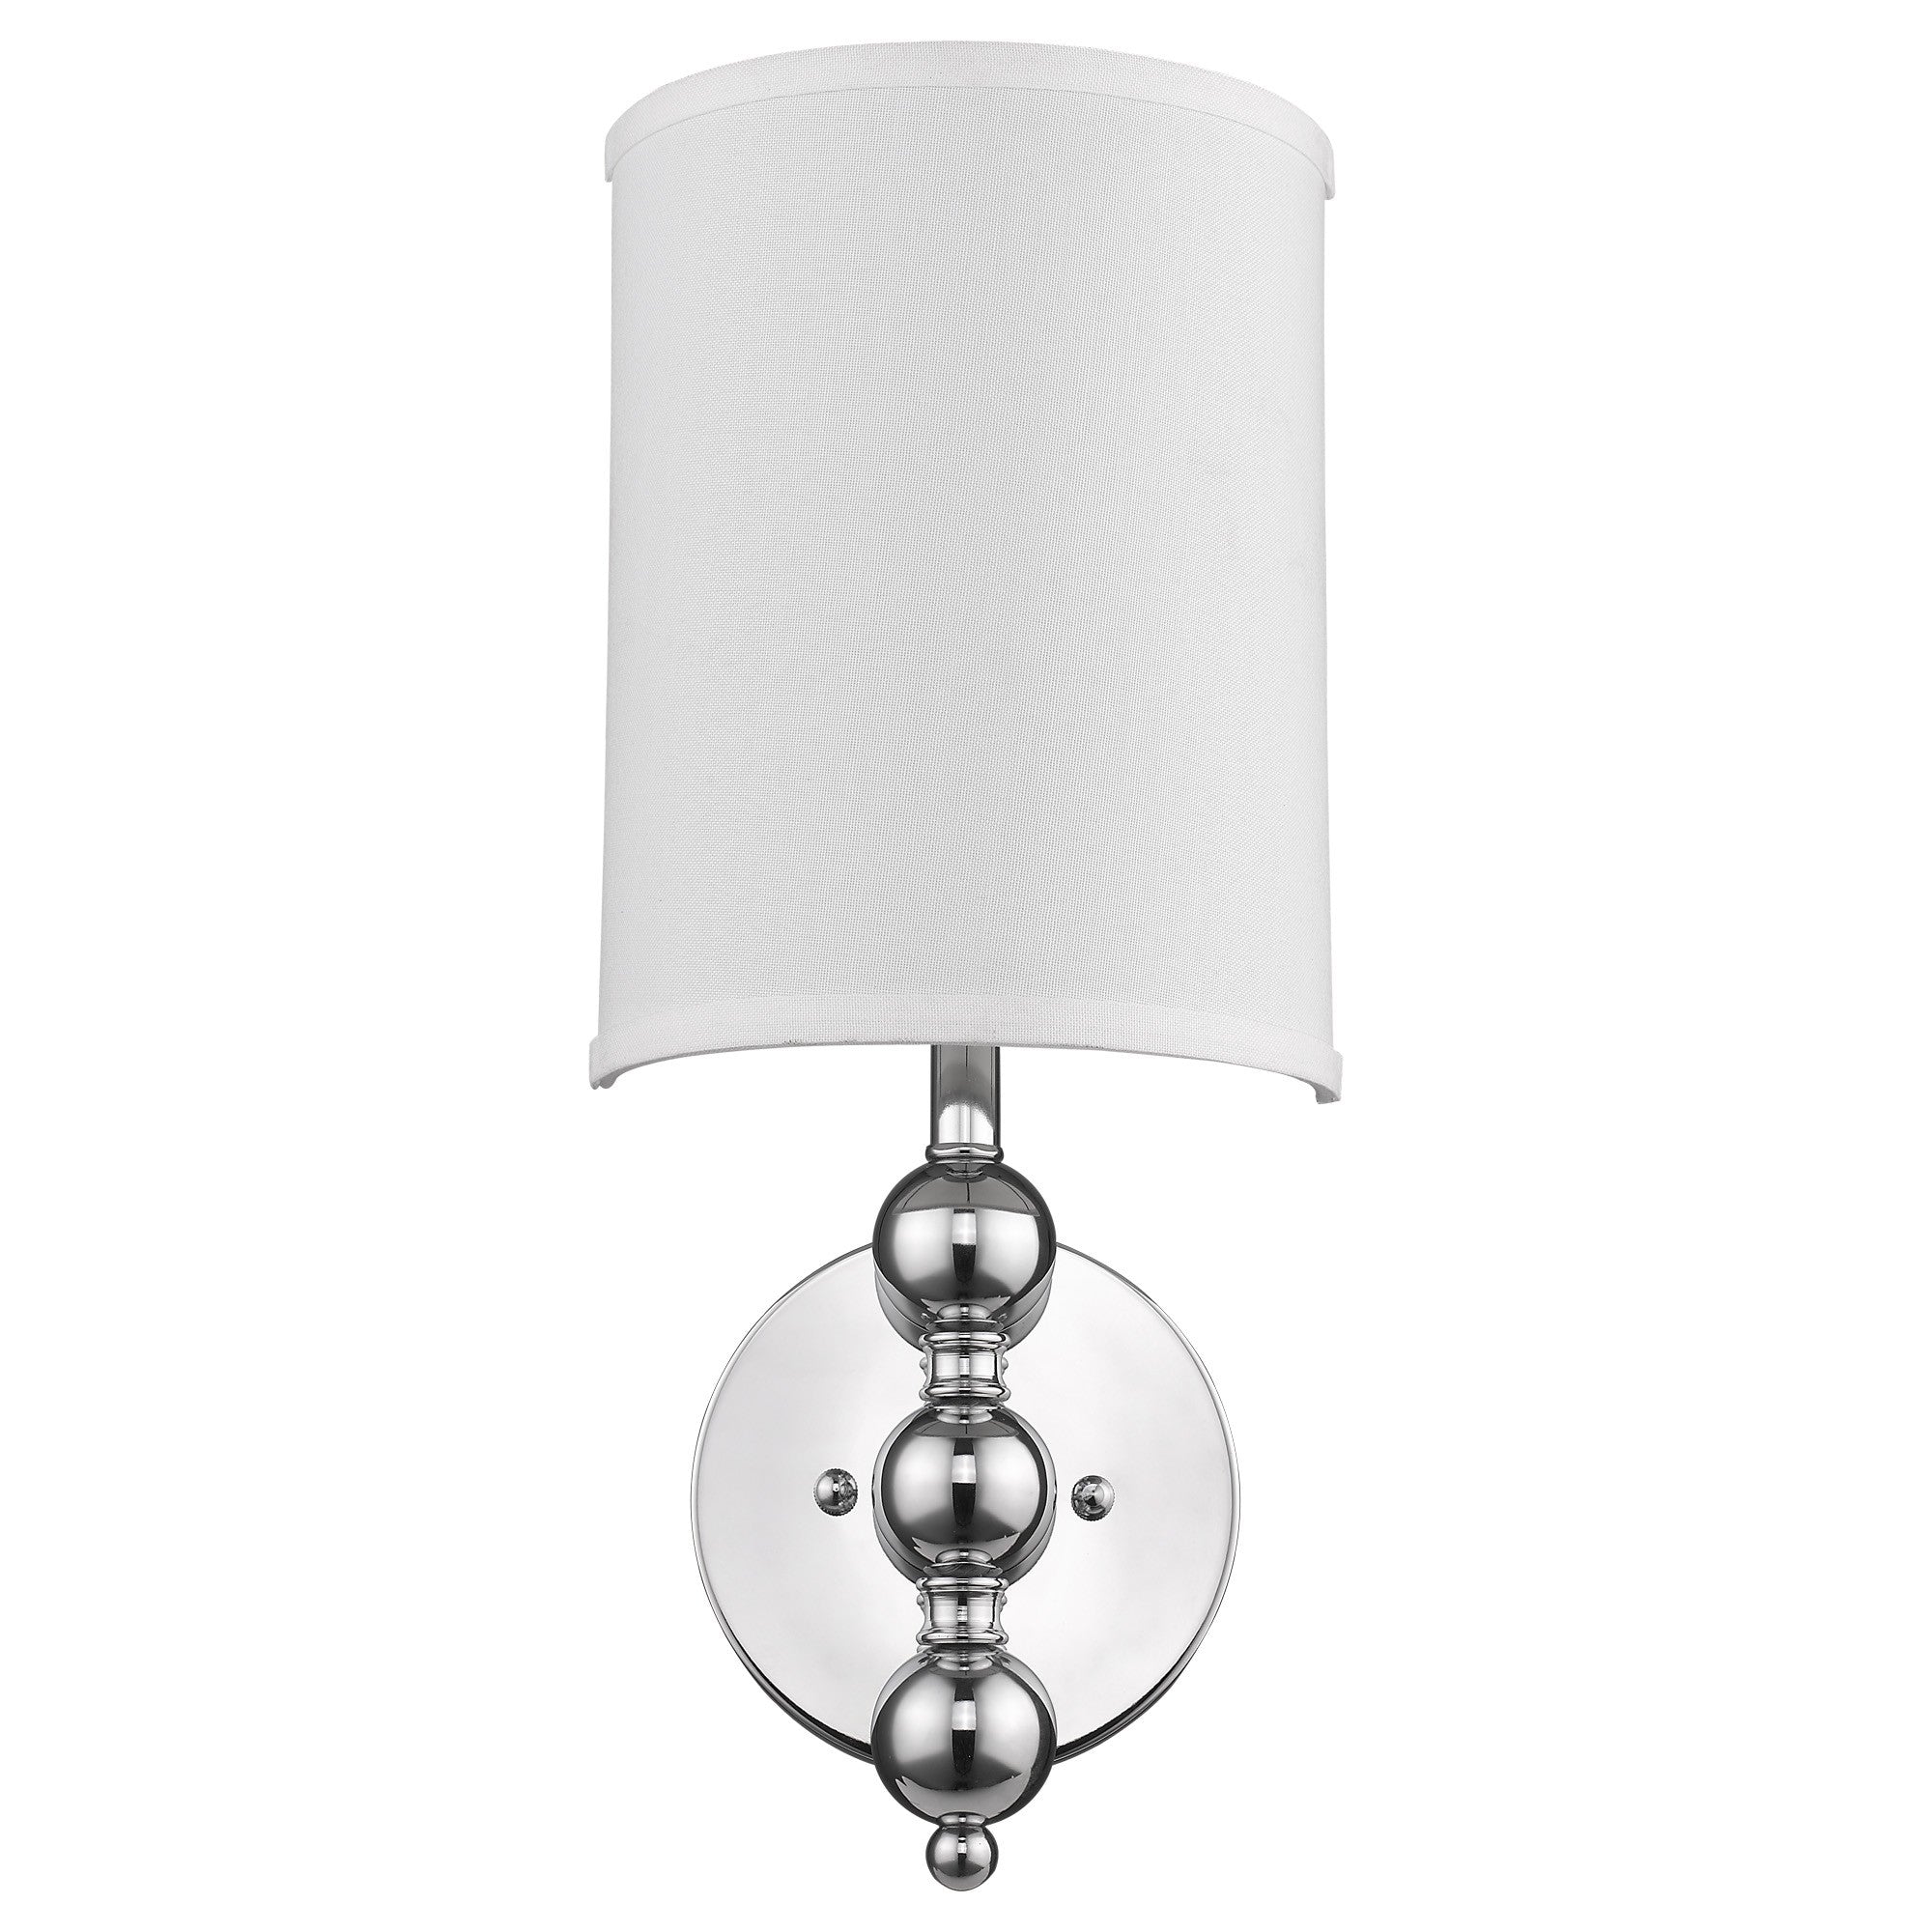 Silver-Chrome-Wall-Light-with-Linen-Fabric-Shade-Wall-Lighting